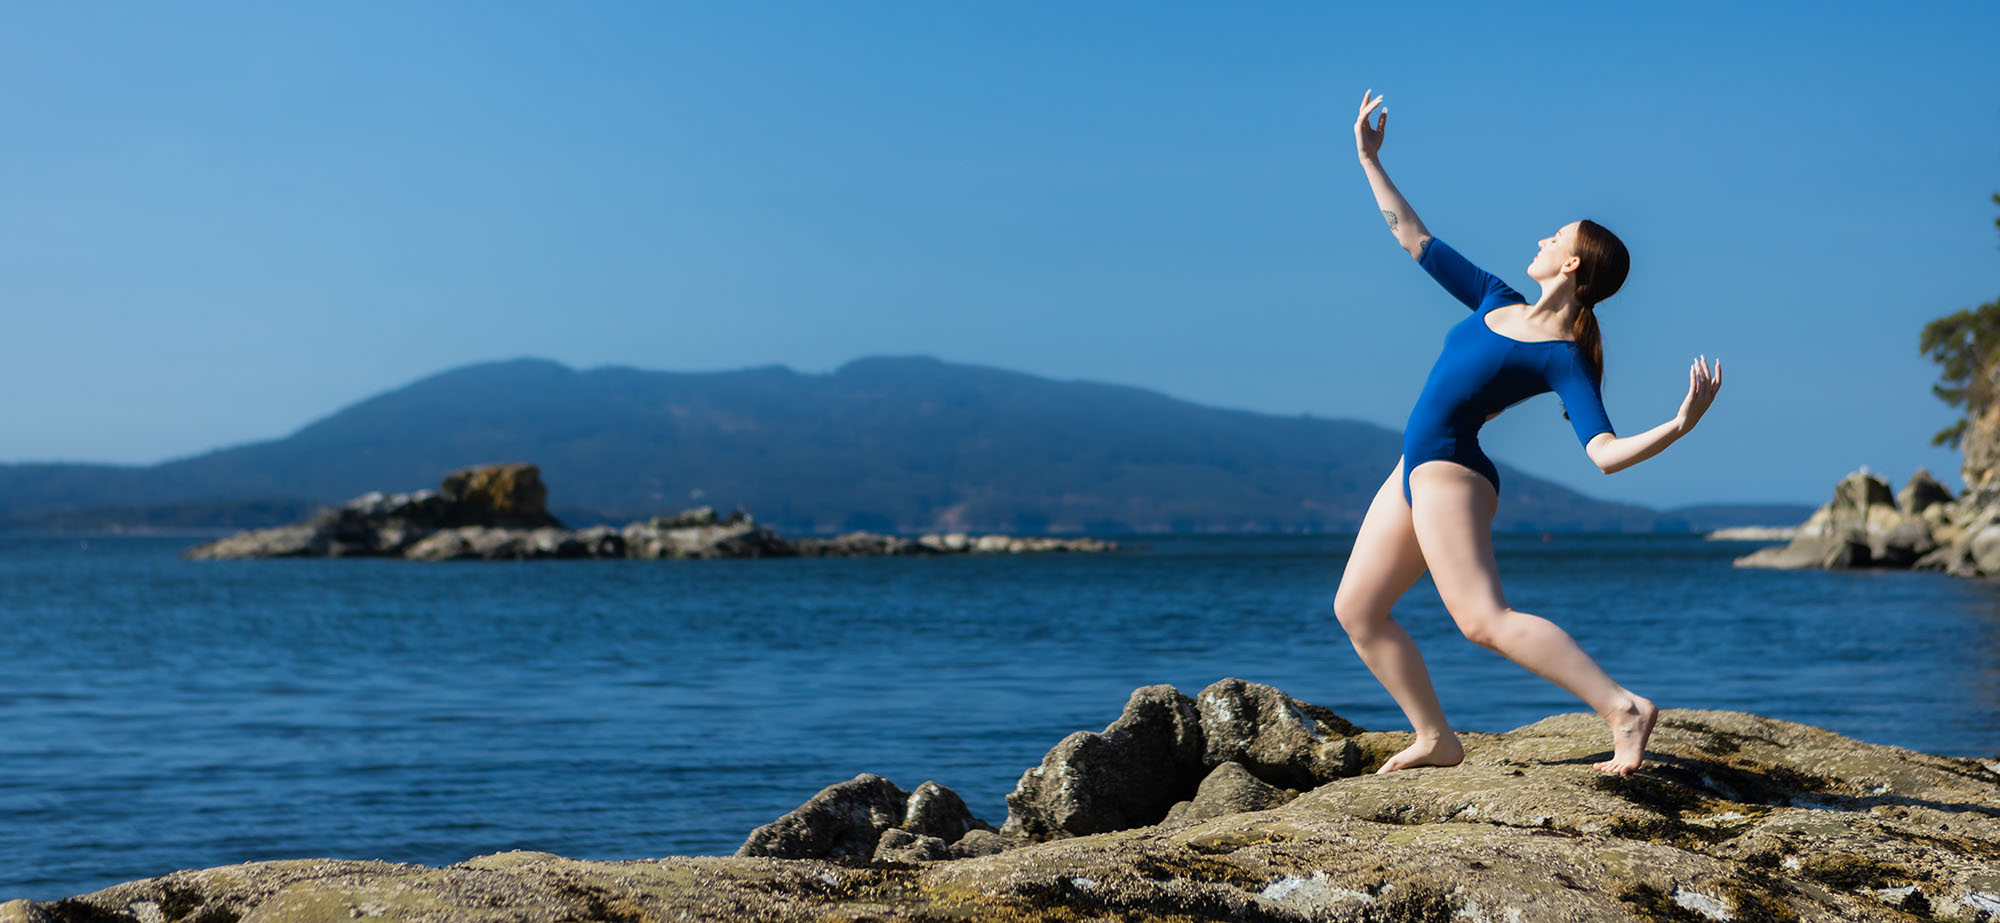 A dancer in a blue leotard stands on a rock by the sea leaning back with arms in a heroic position